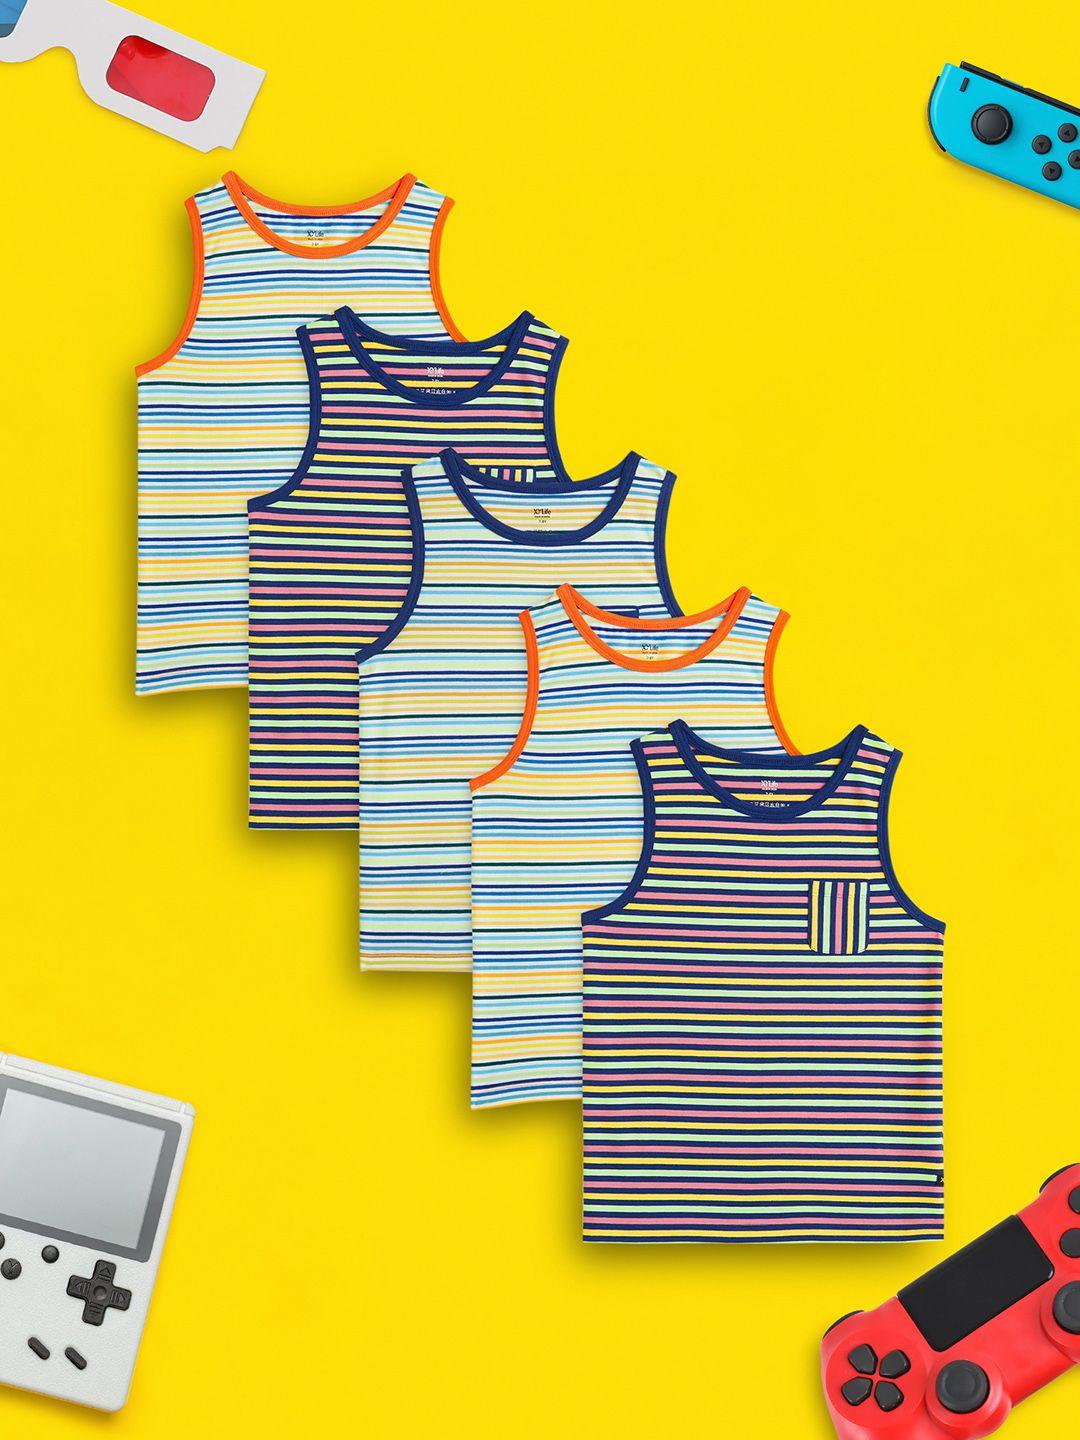 xy-life-boys-pack-of-5-striped-cotton-innerwear-vests